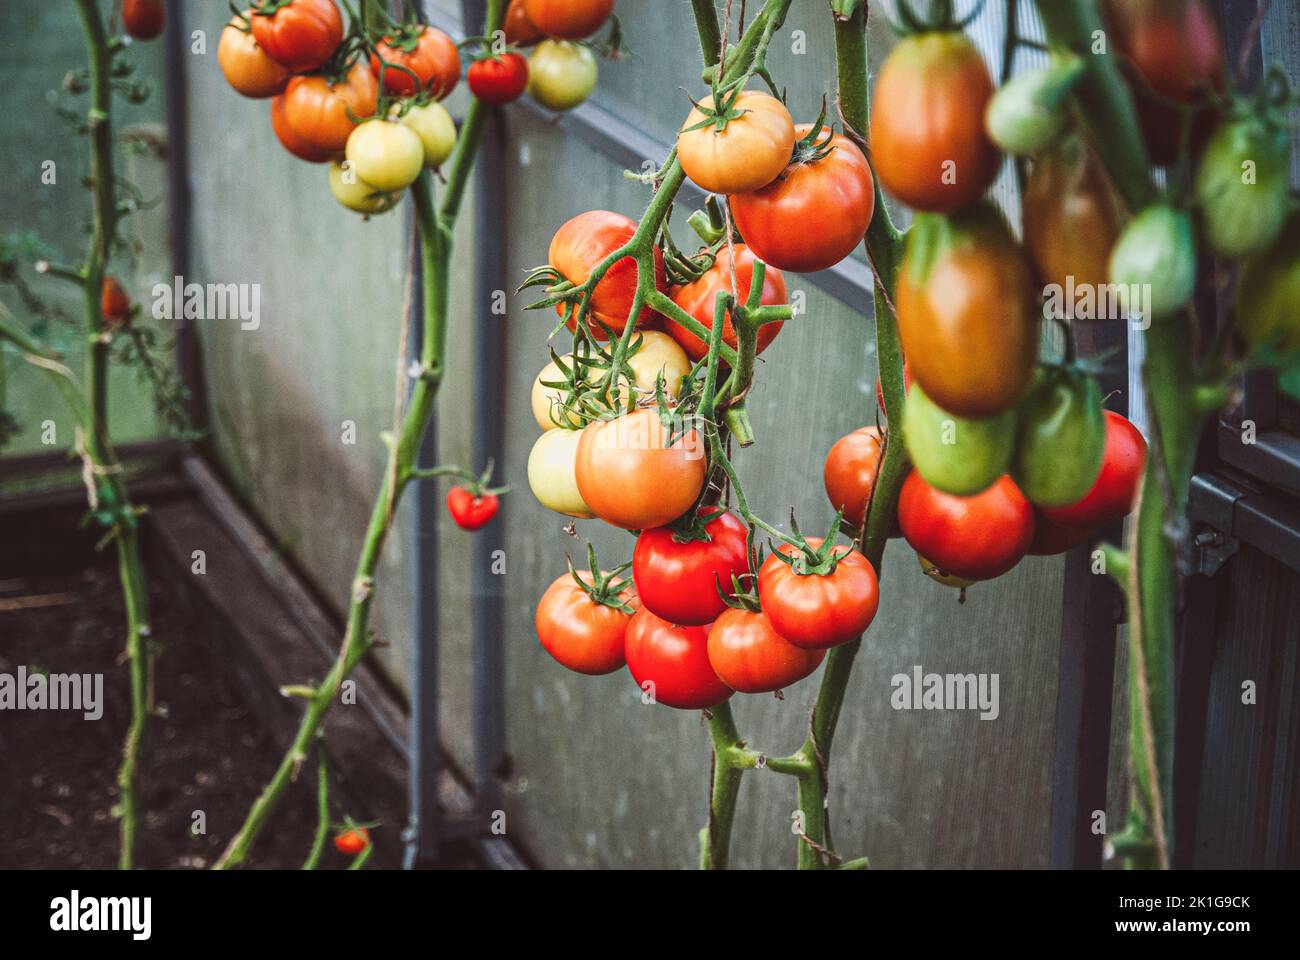 Tomato plants without leaves with ripening tomatoes in greenhouse Stock Photo